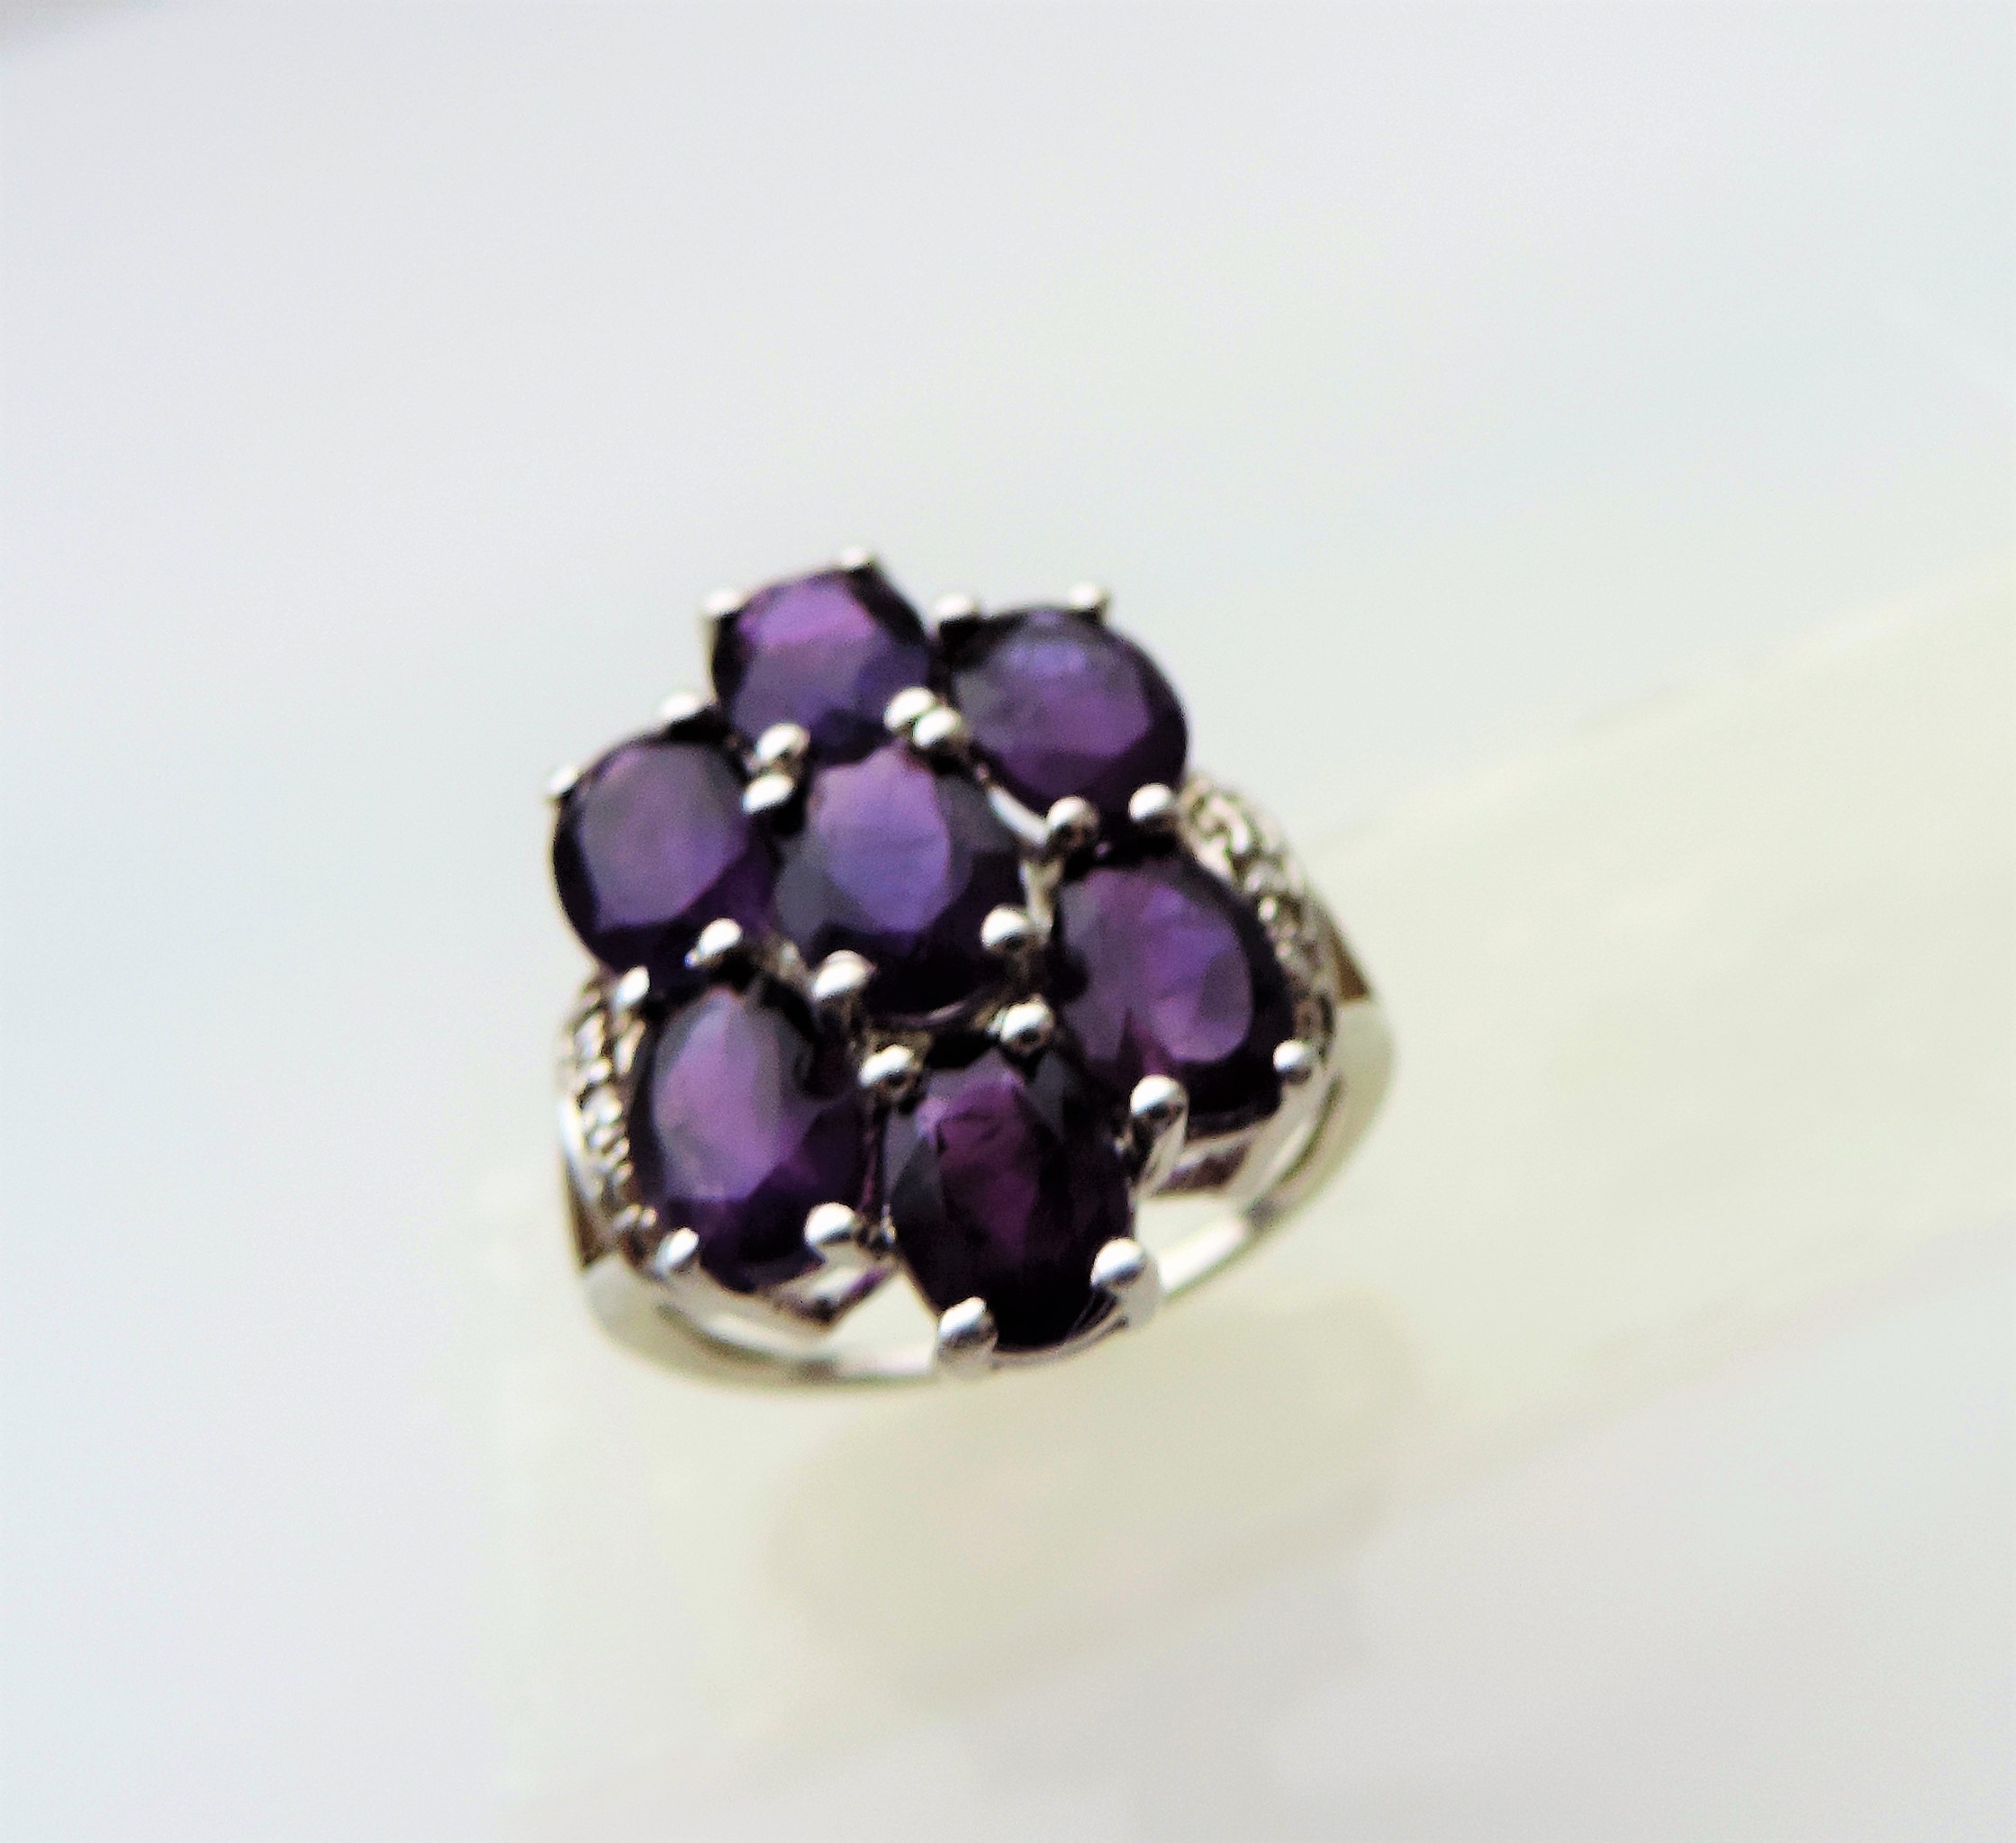 3.15 carat Amethyst Cluster Ring - Image 3 of 5